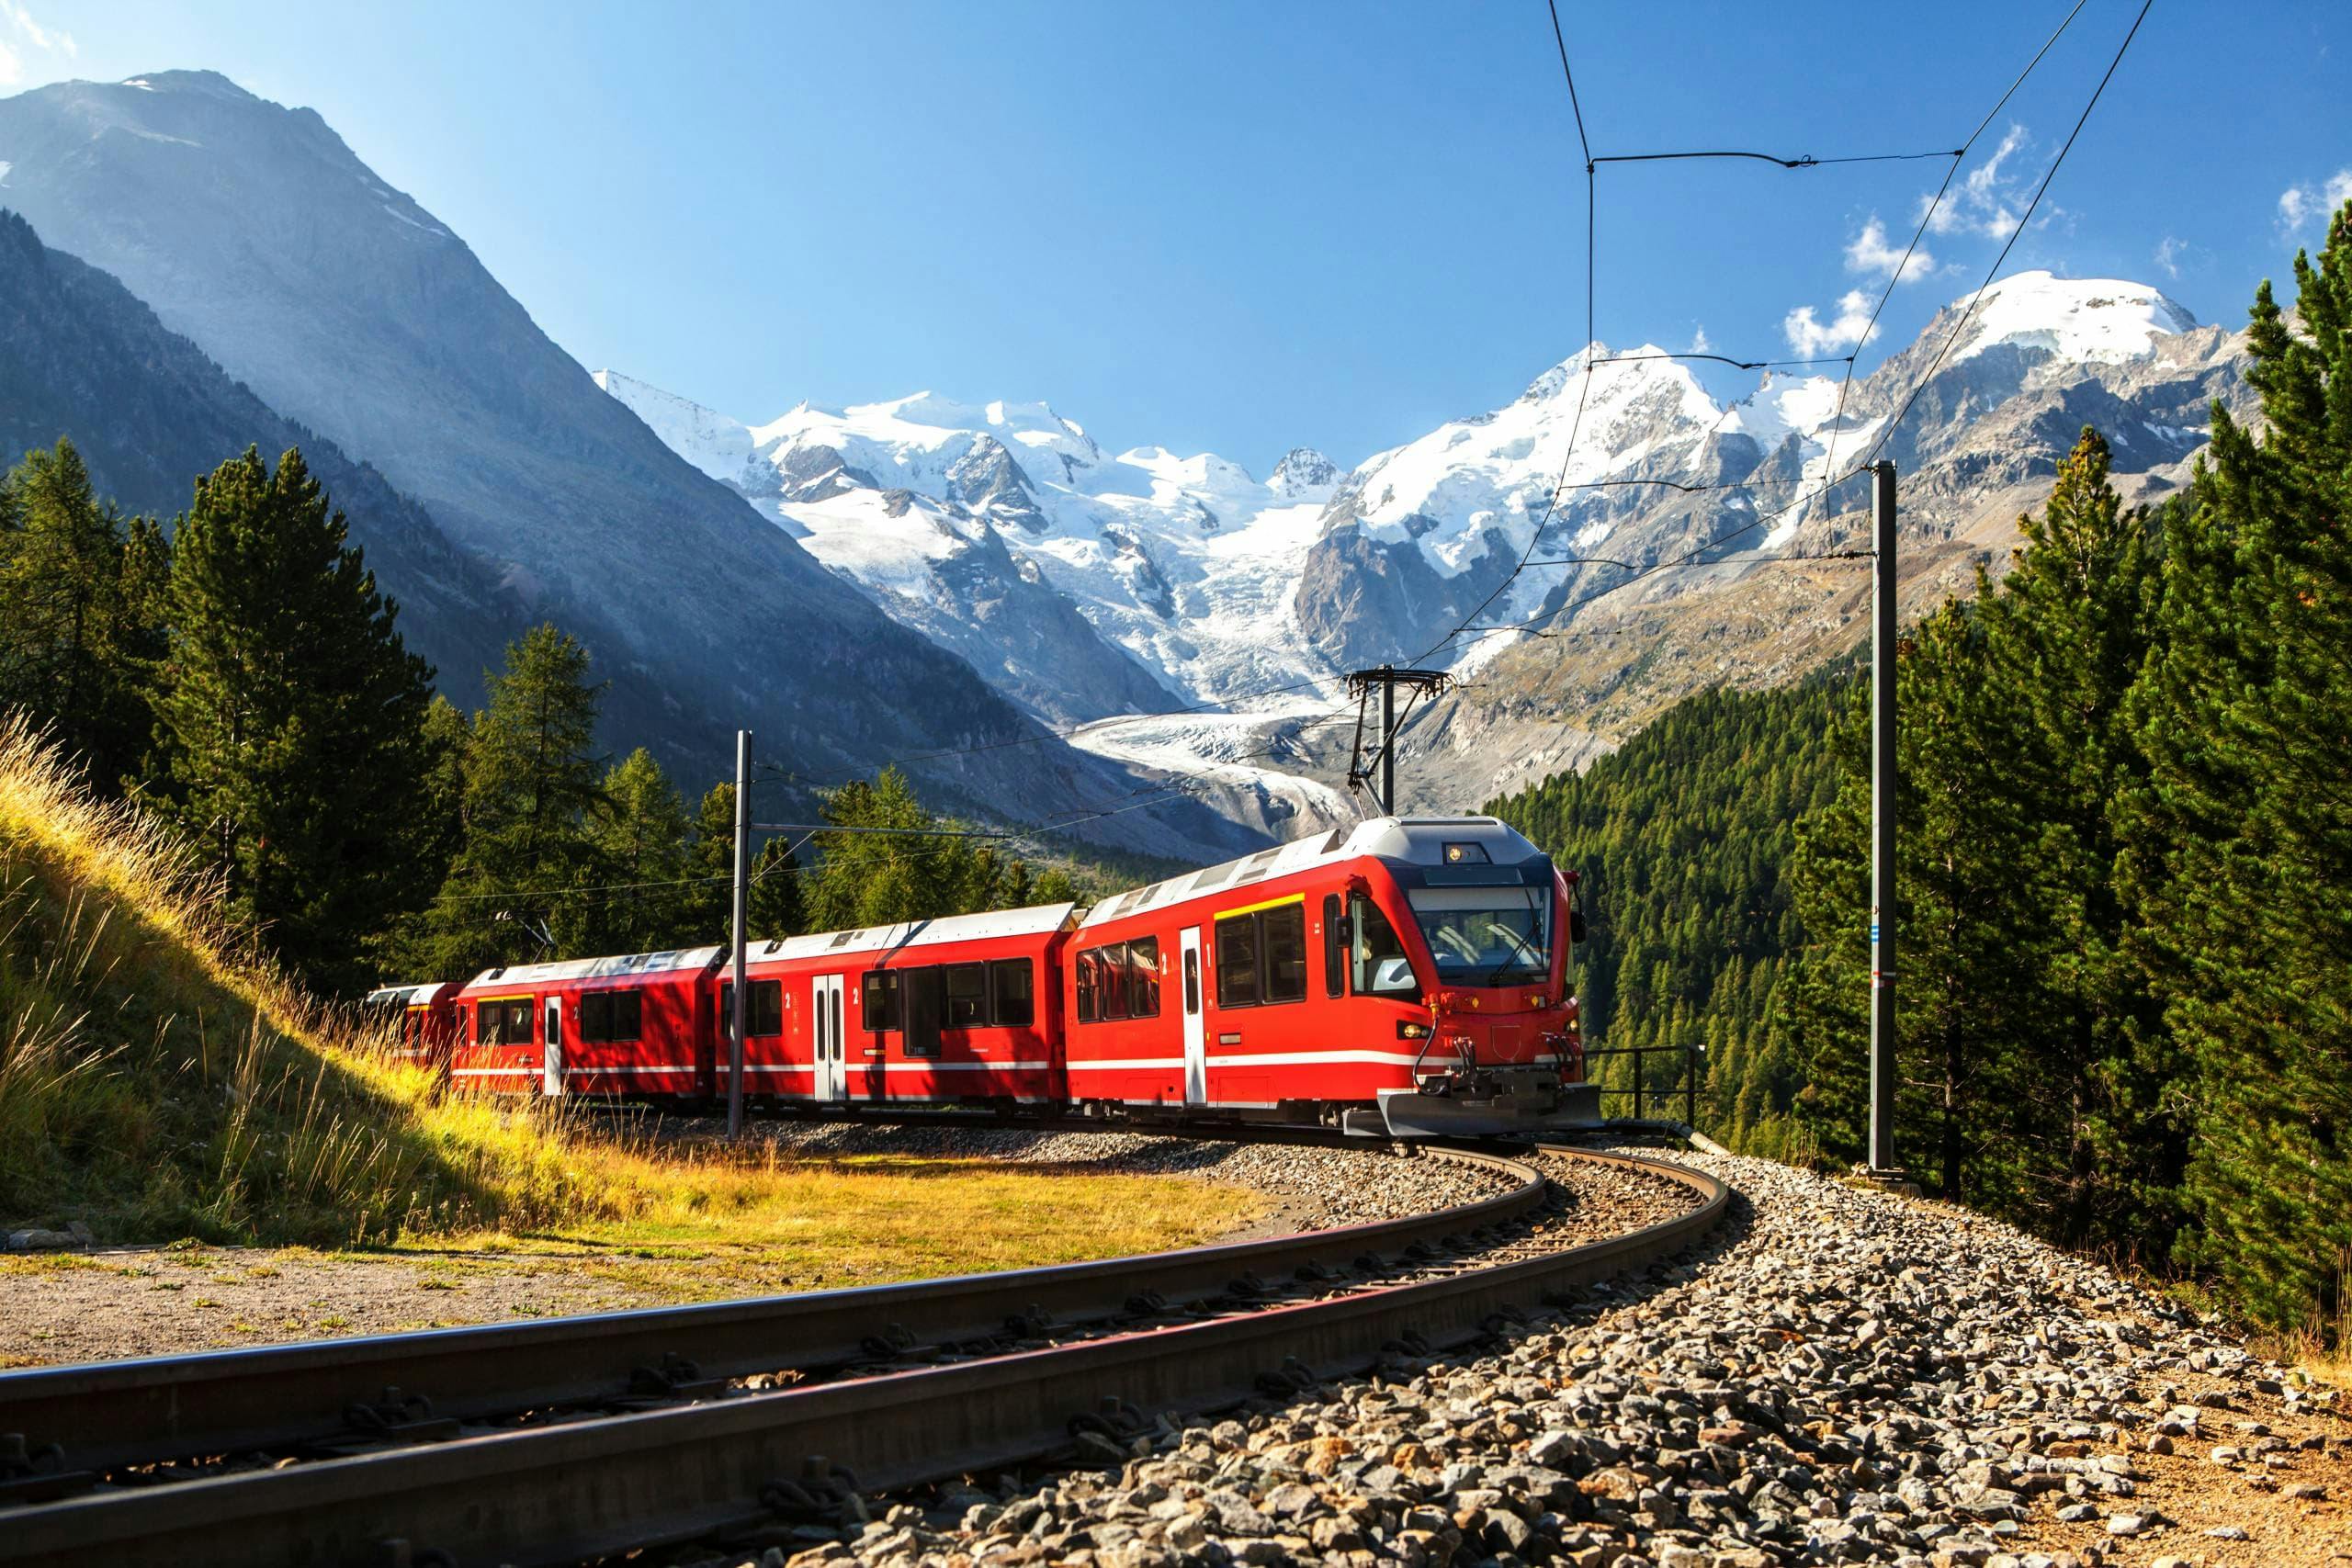 Travel in the mountains by train